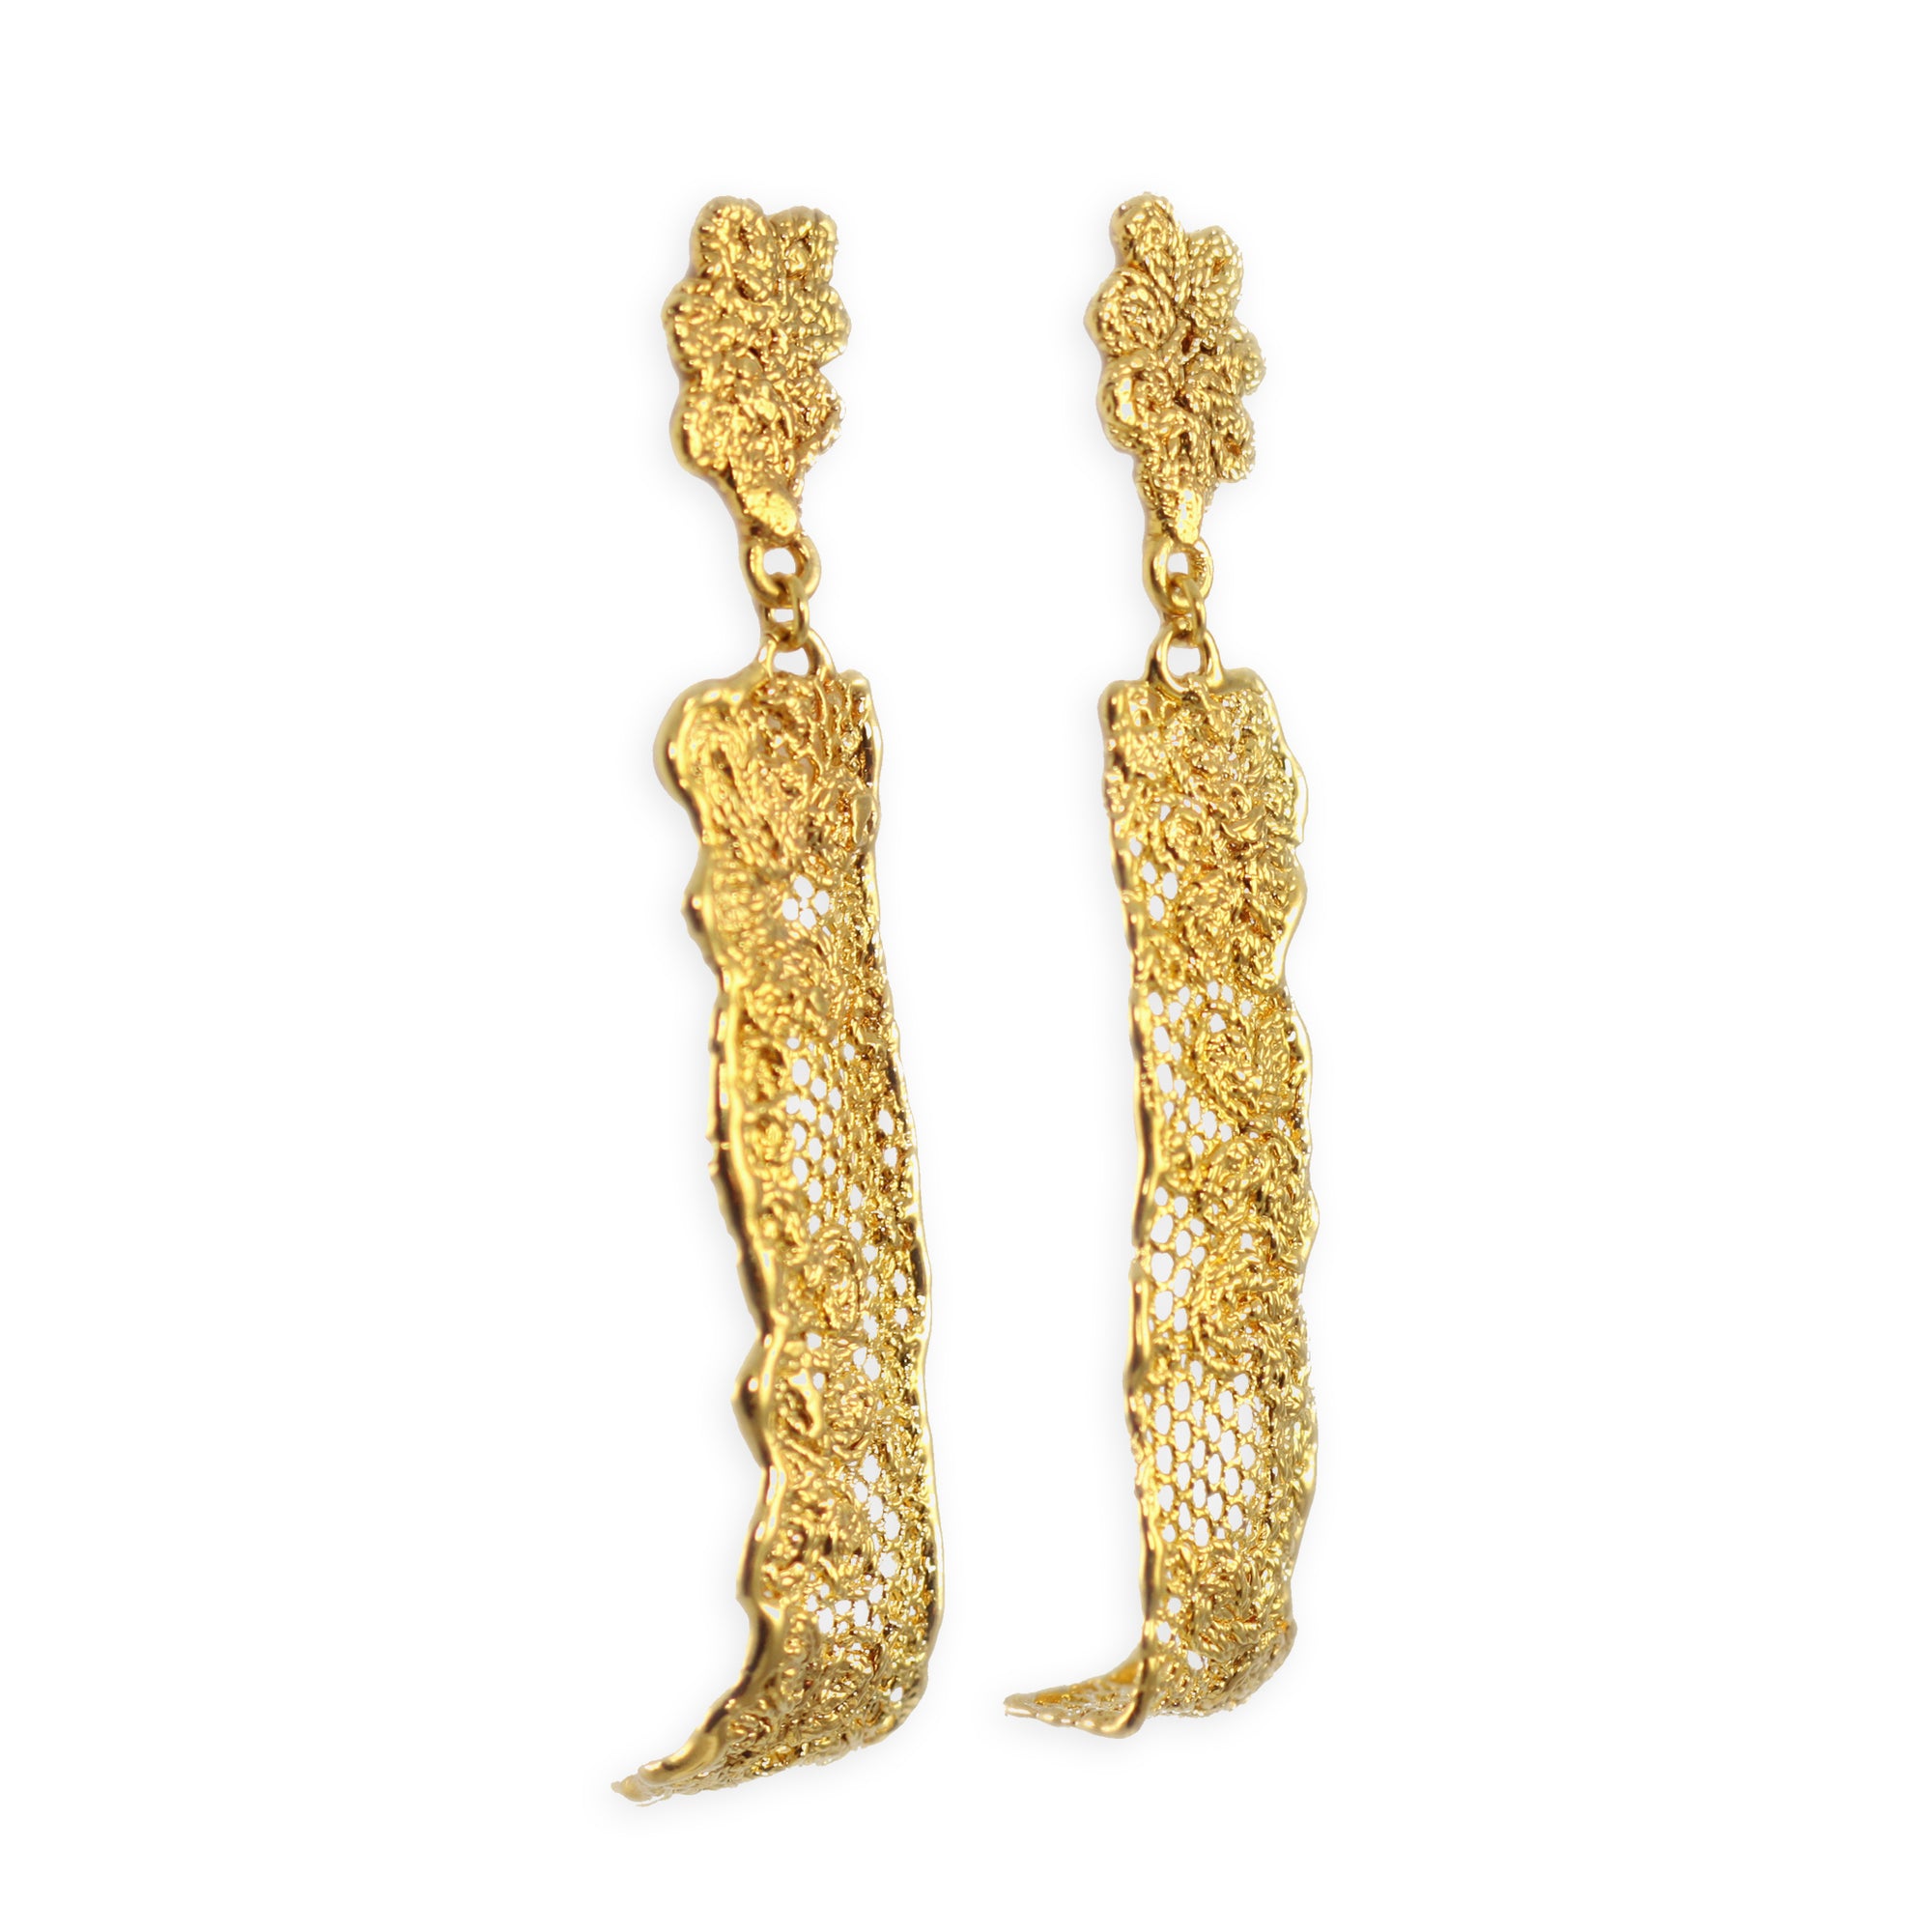 Long lace earrings with fine details in 24k gold.